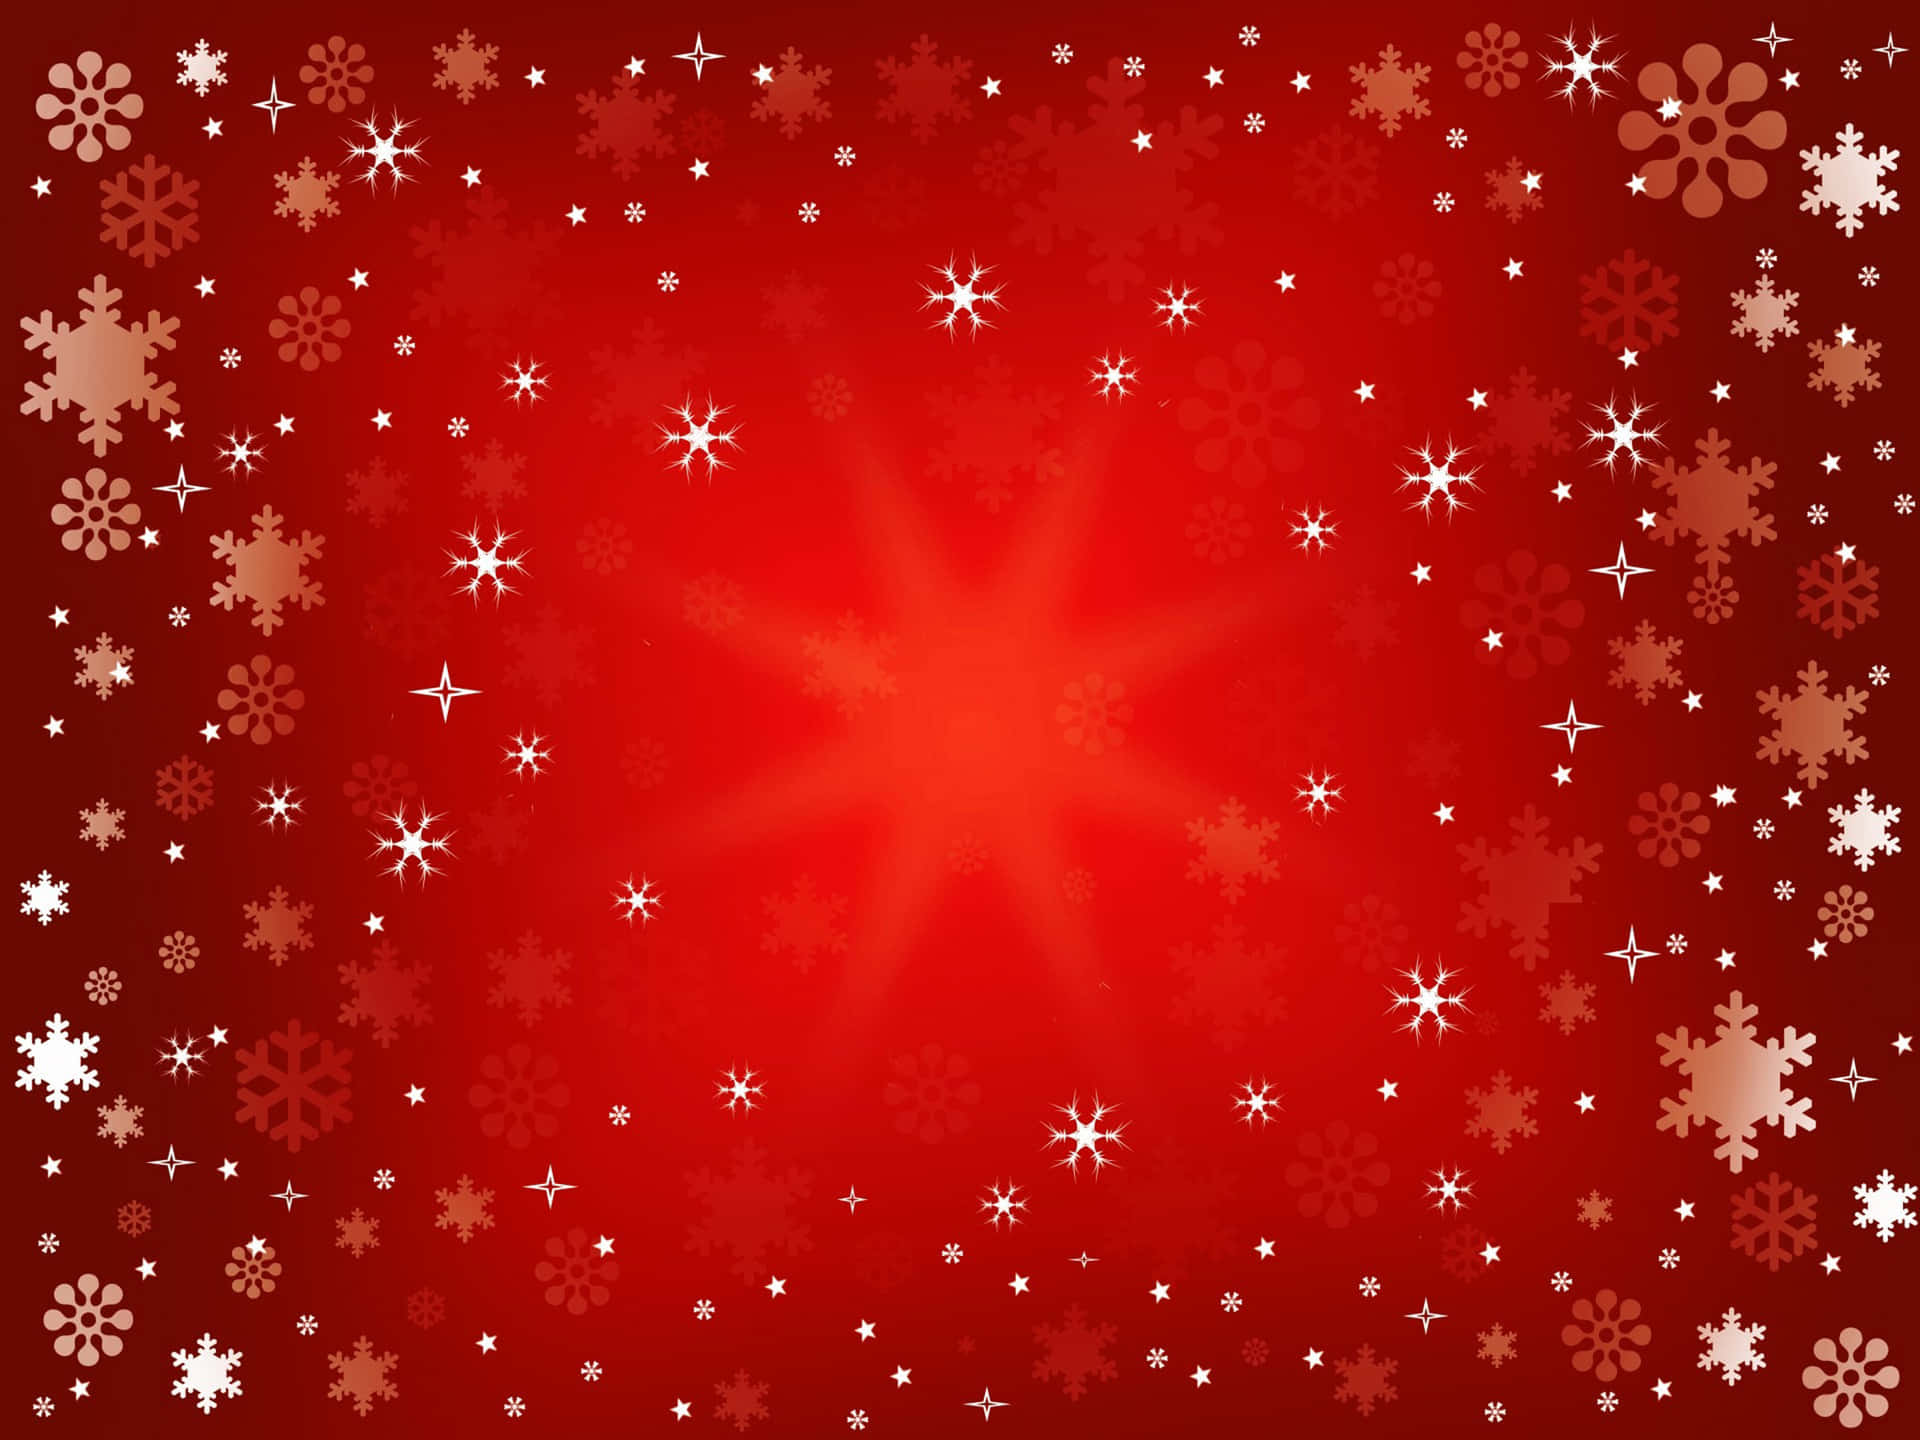 Celebrate the holiday season with this festive Christmas red background!